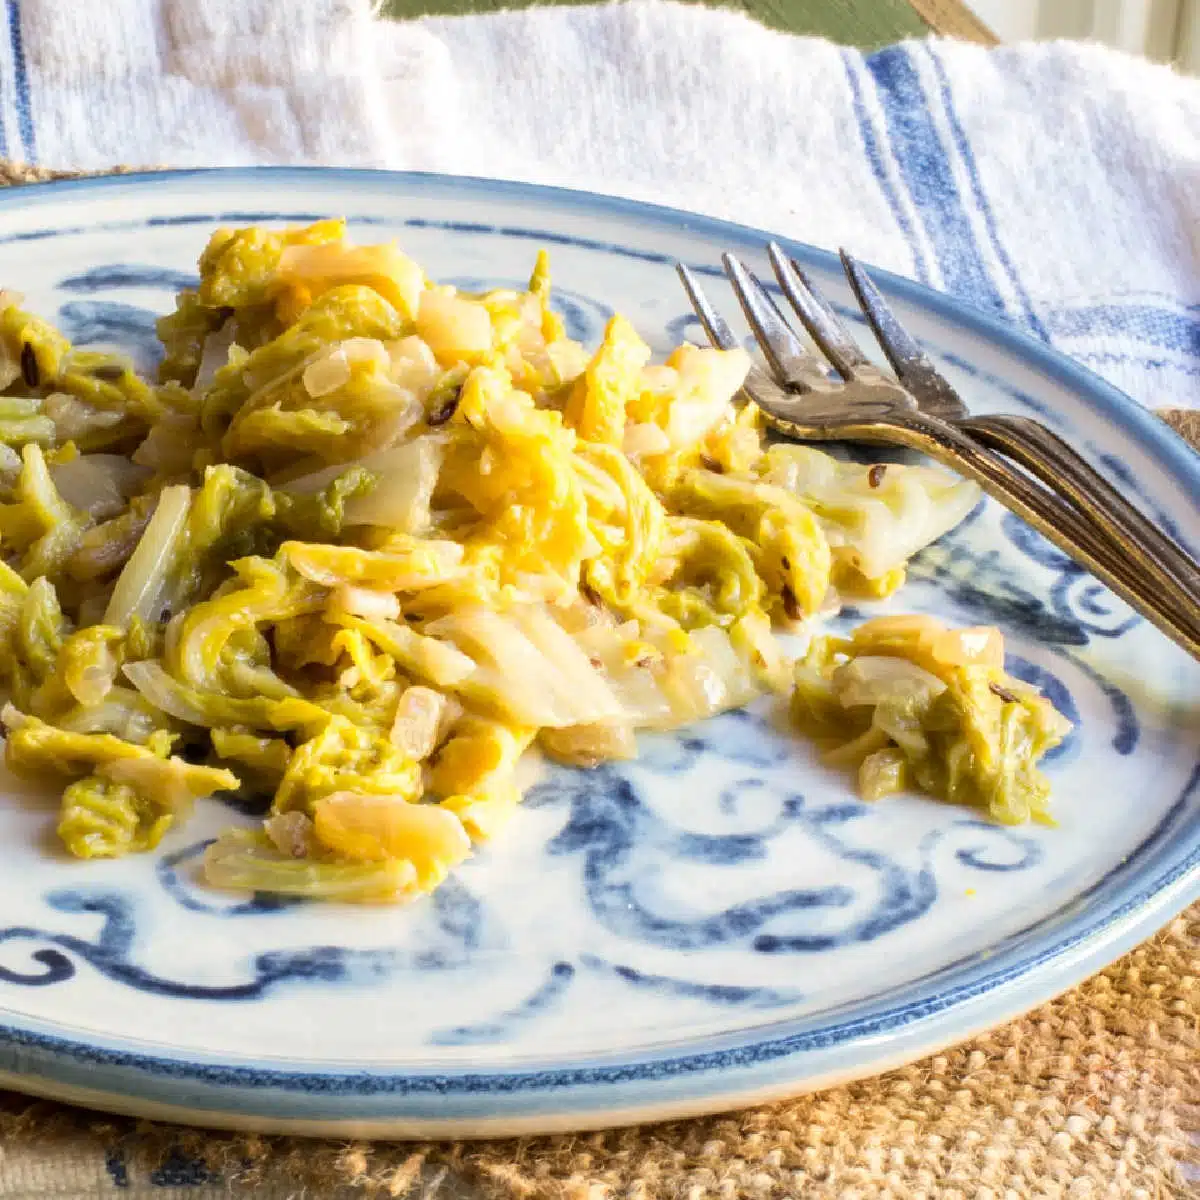 Braised cabbage on a plate with two small forks.